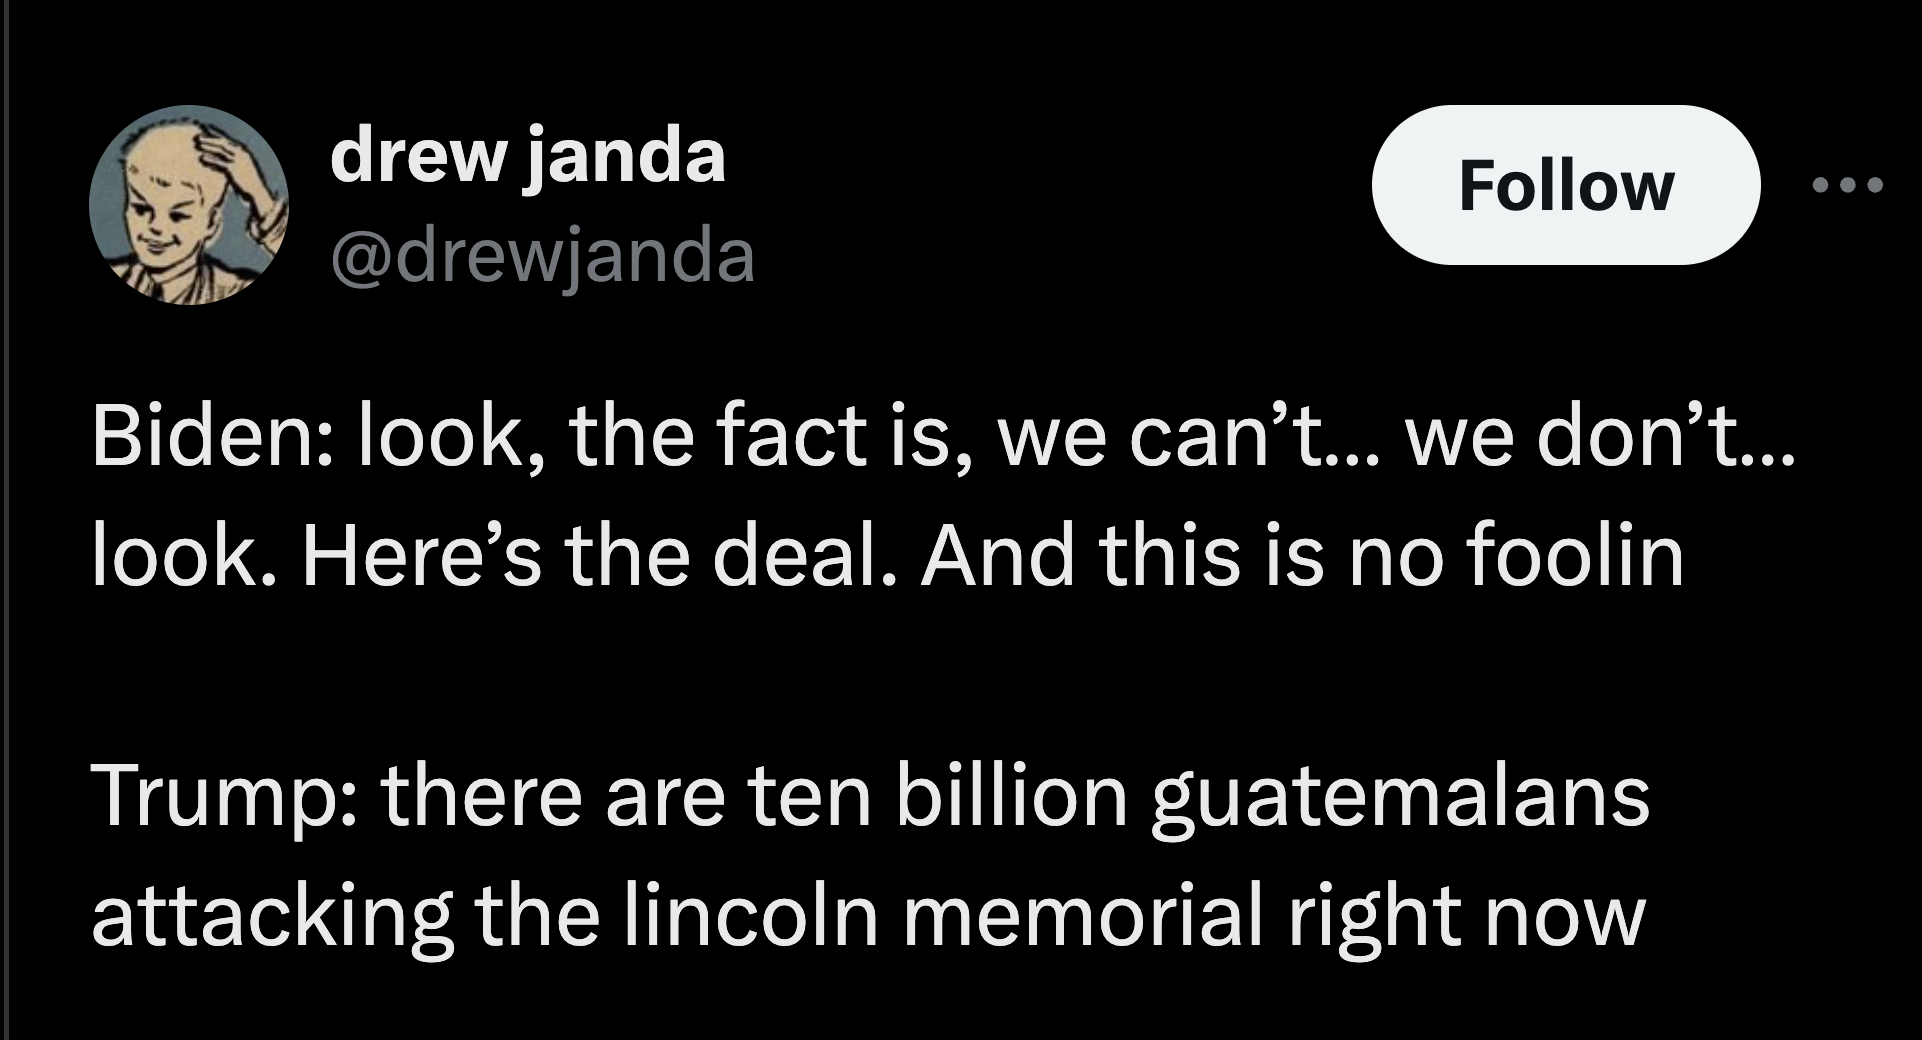 colorfulness - drew janda Biden look, the fact is, we can't... we don't... look. Here's the deal. And this is no foolin Trump there are ten billion guatemalans attacking the lincoln memorial right now